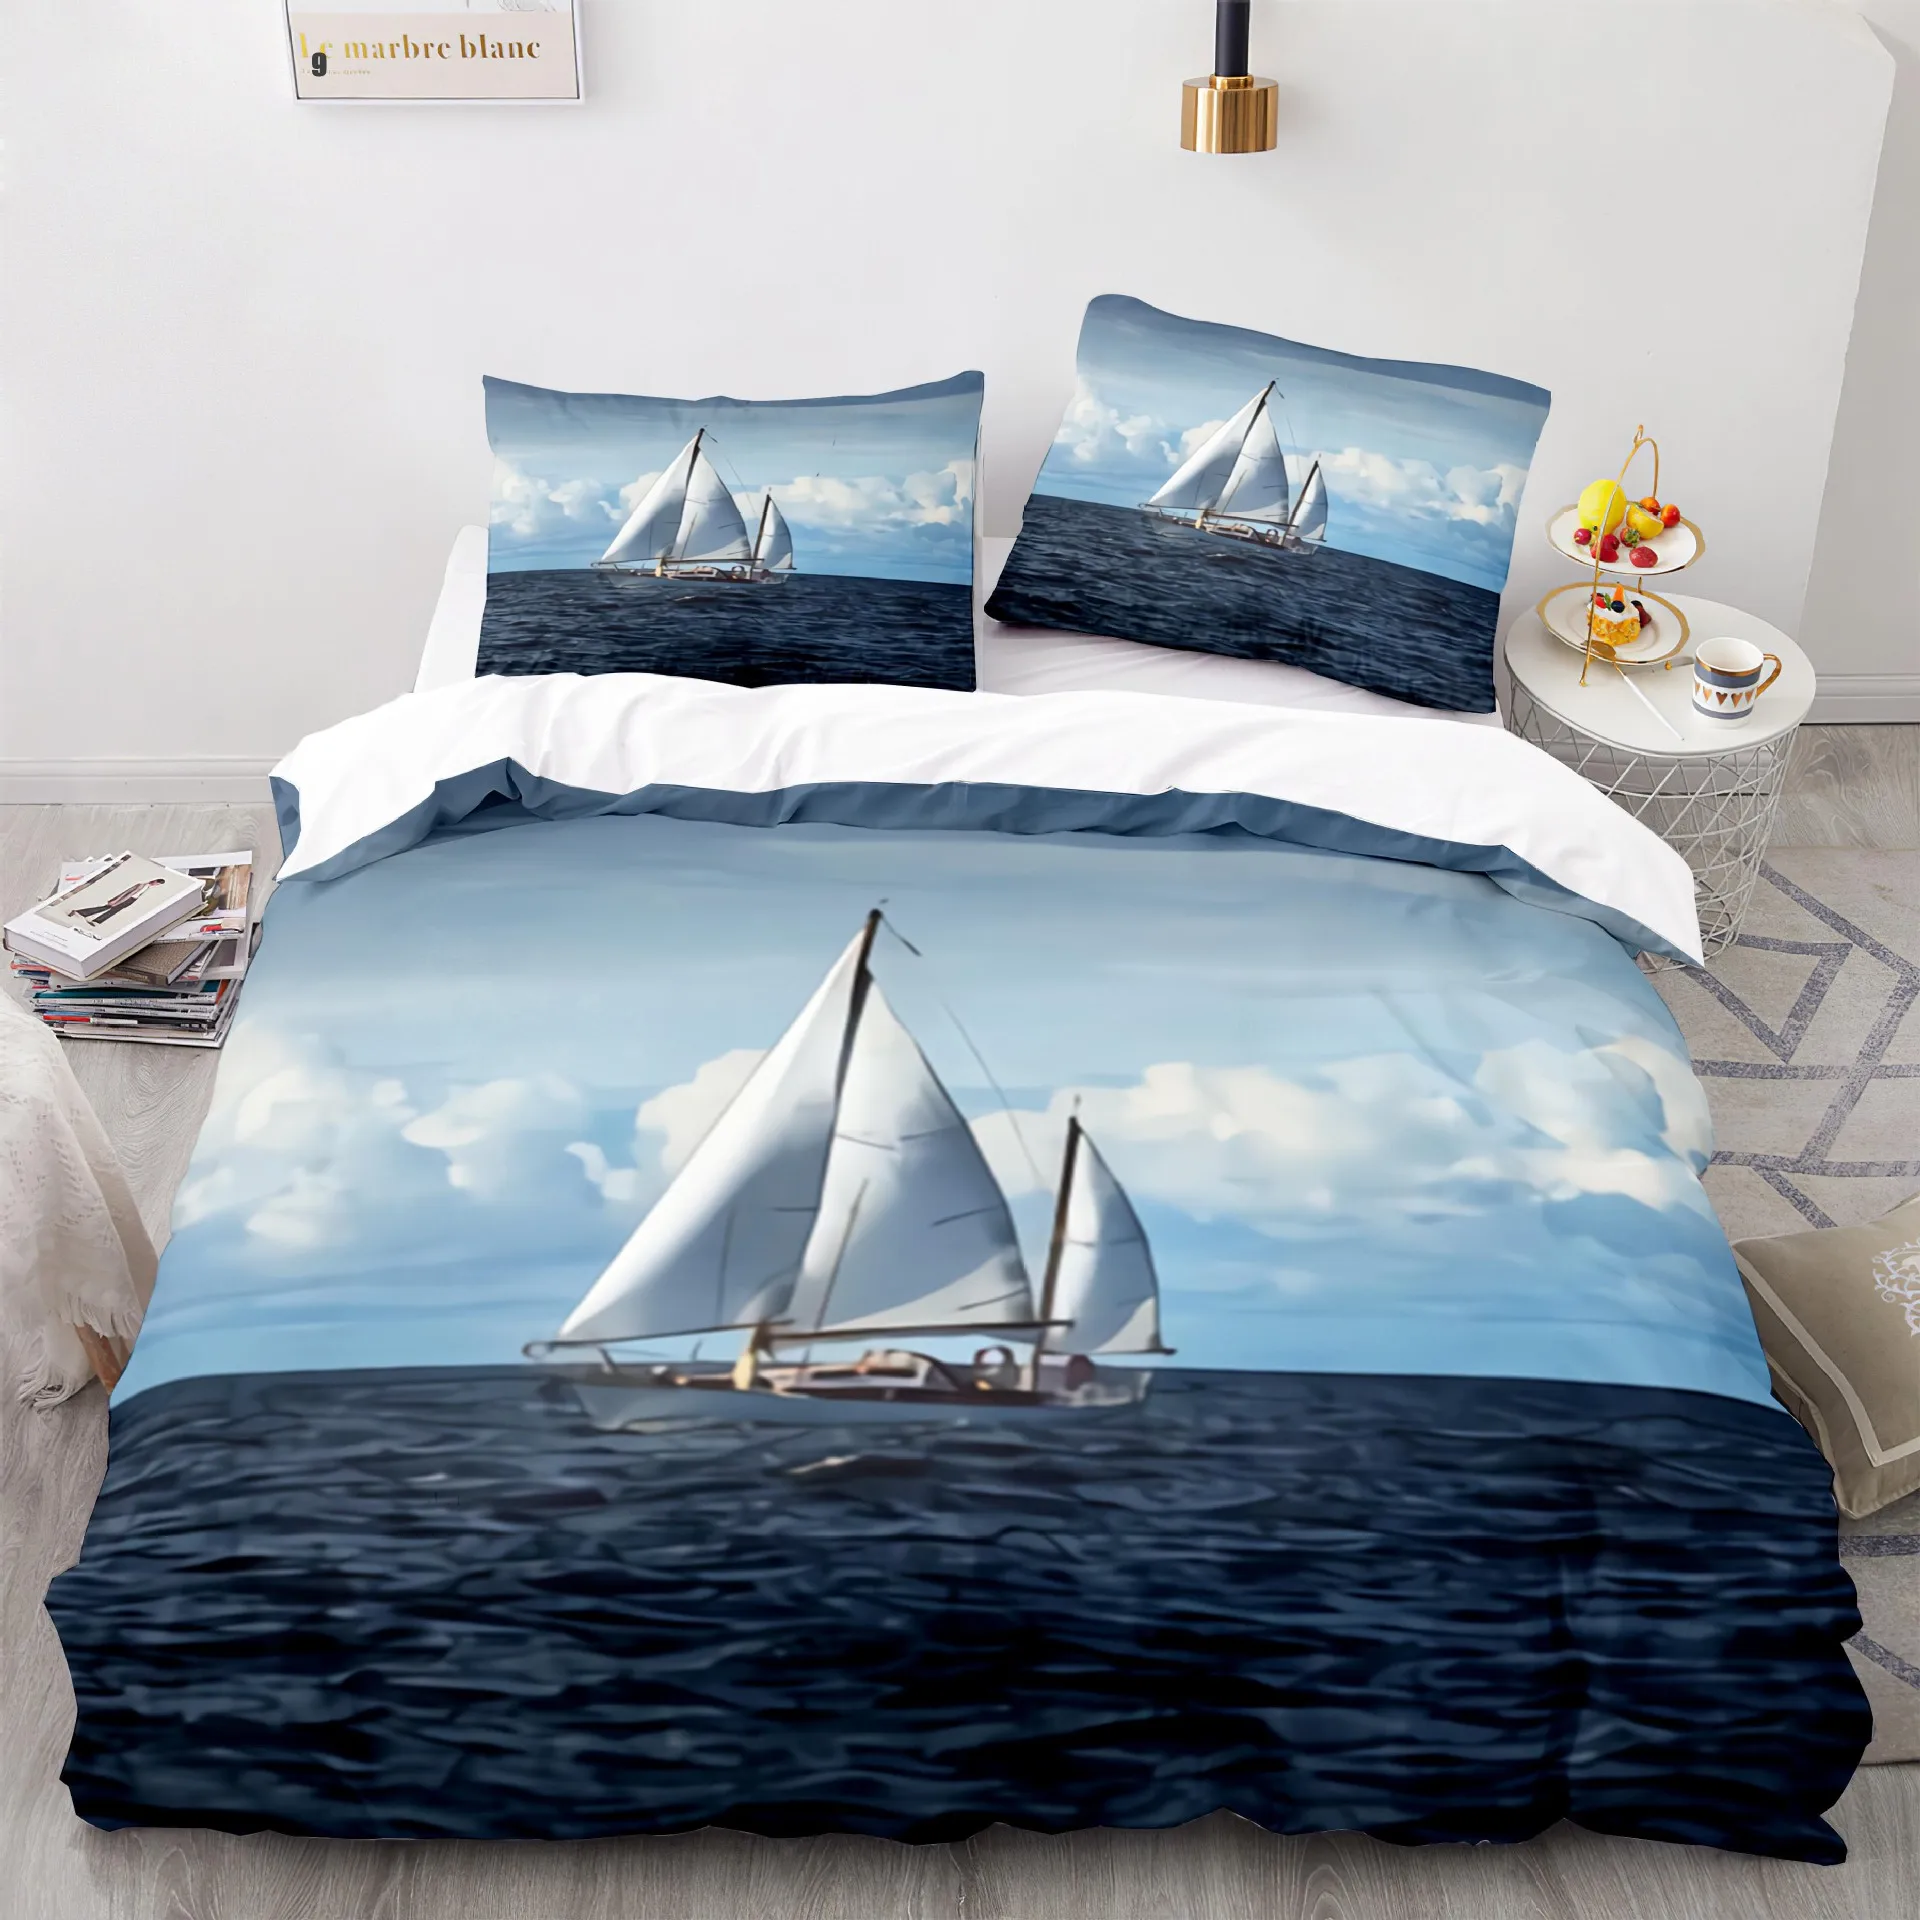 Wave Duvet Cover Set,Sea Ocean Nautical Bedding Set Sailboat Comforter Cover,Queen/King/Full/Twin Size Polyester Quilt Cover